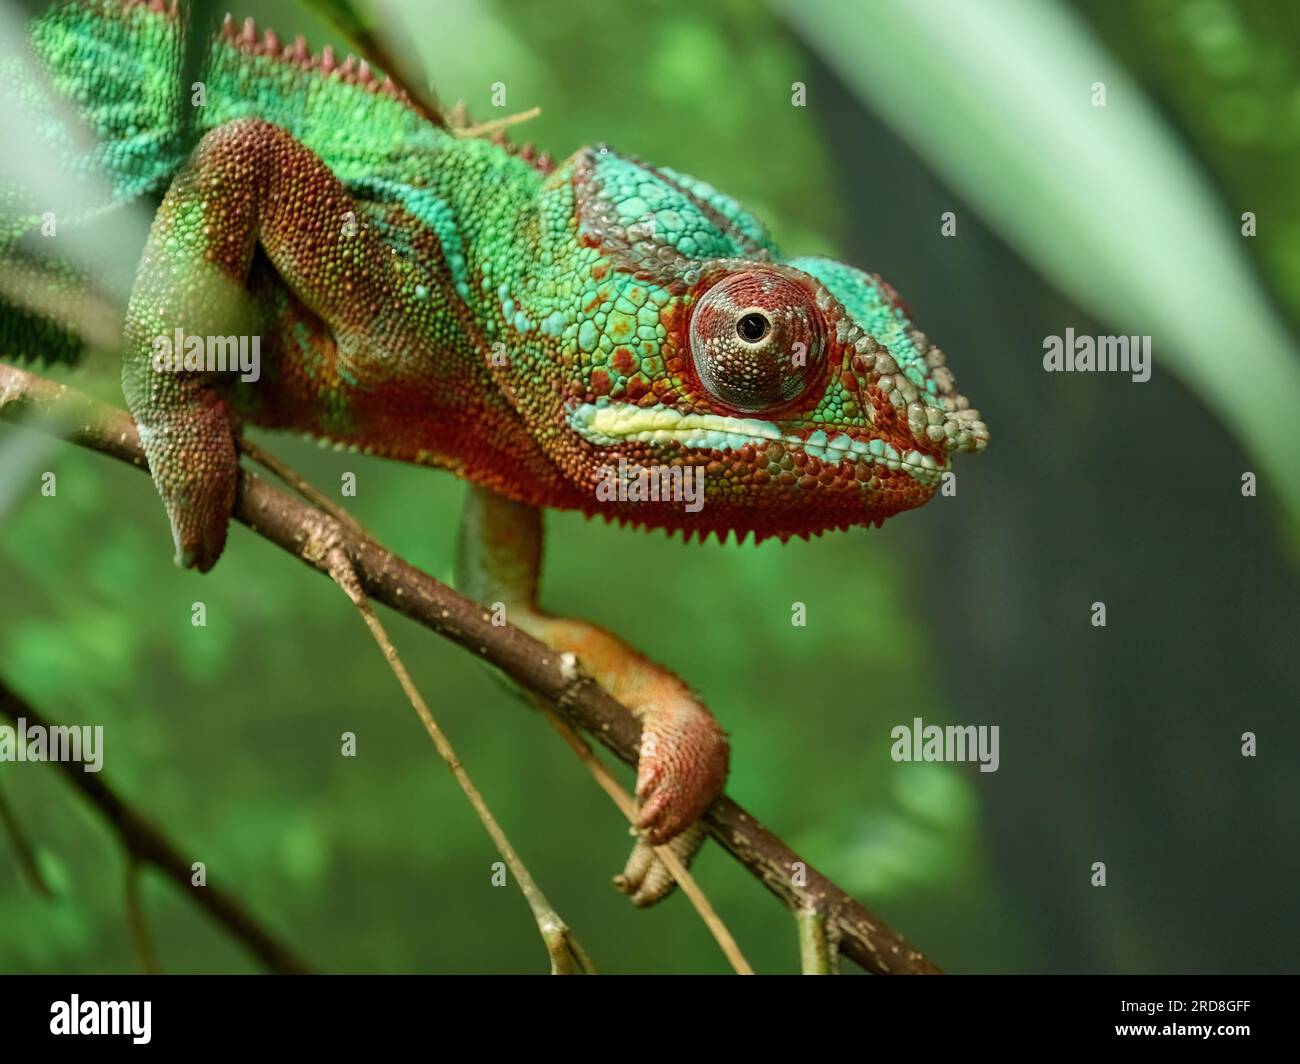 Panther chameleon (Furcifer pardalis) in its natural environment Stock Photo